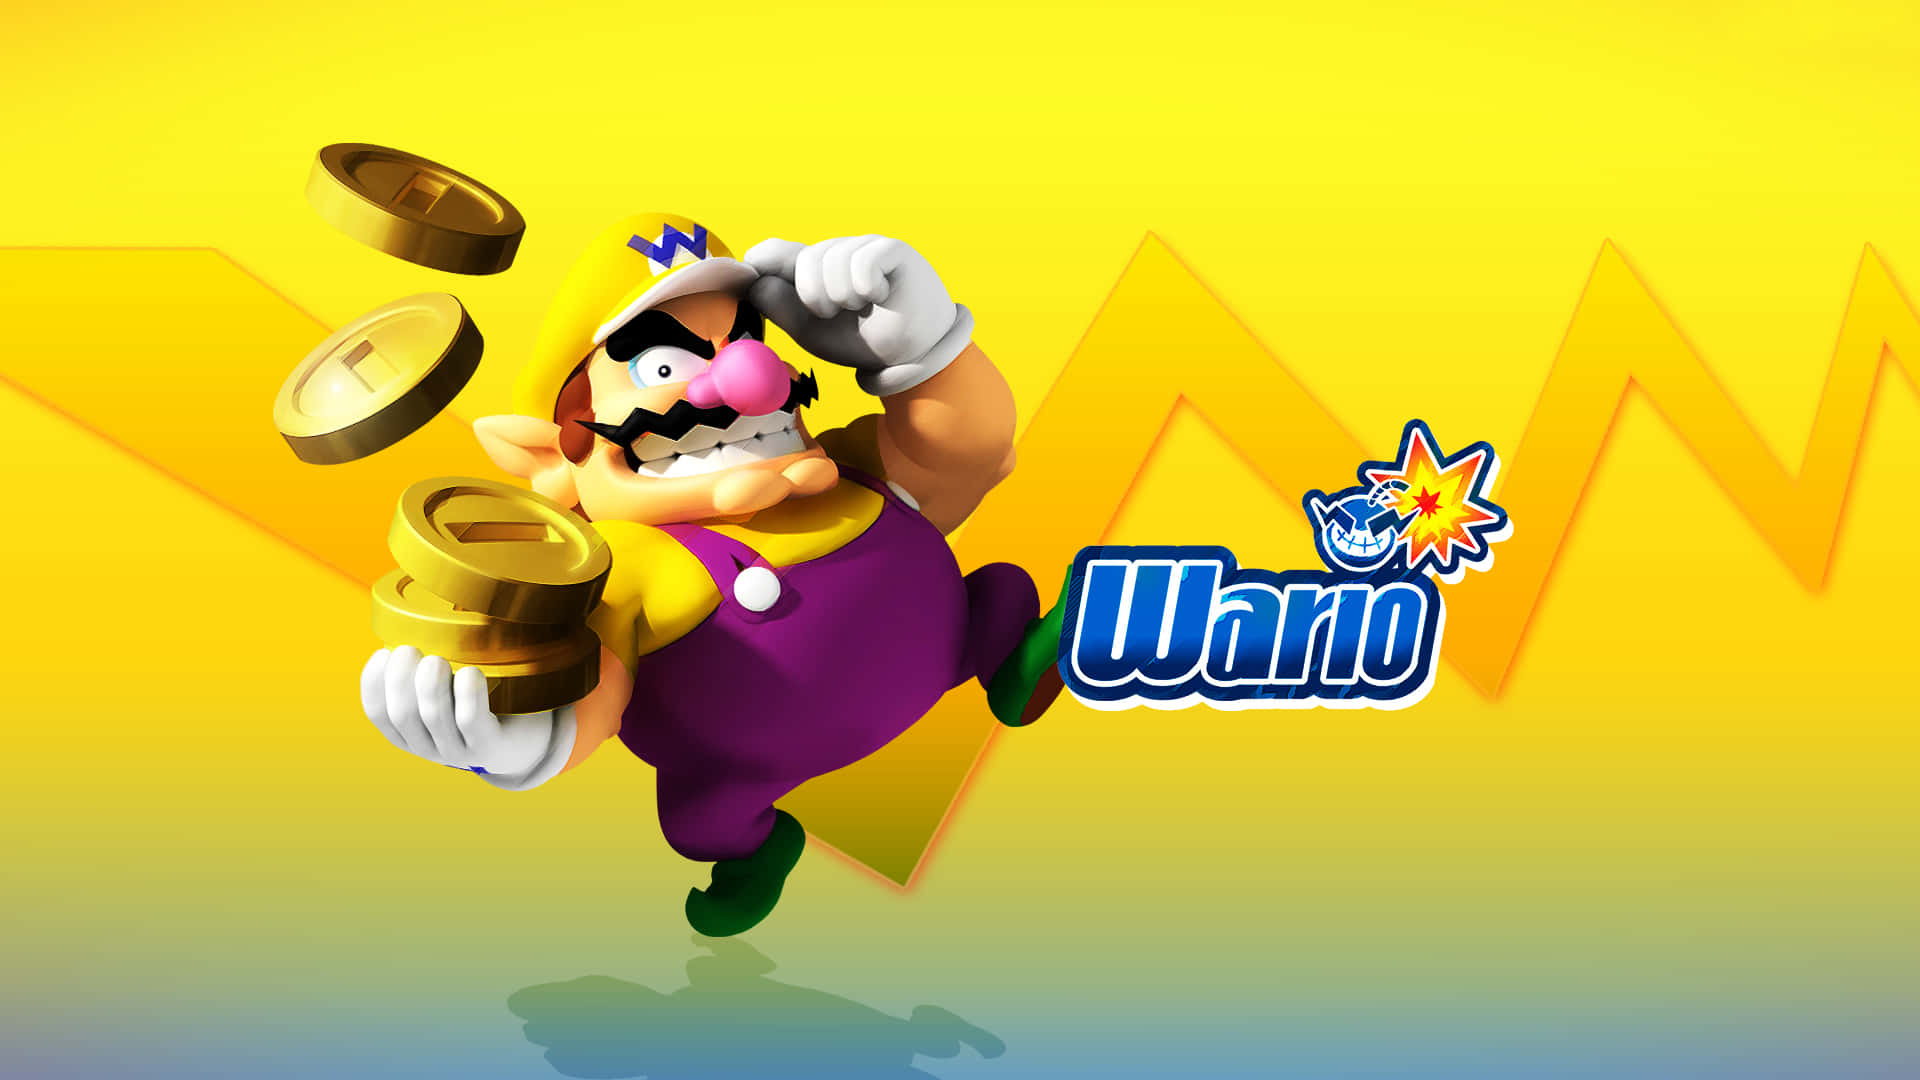 Wario smirking in a colorful, action-packed background Wallpaper